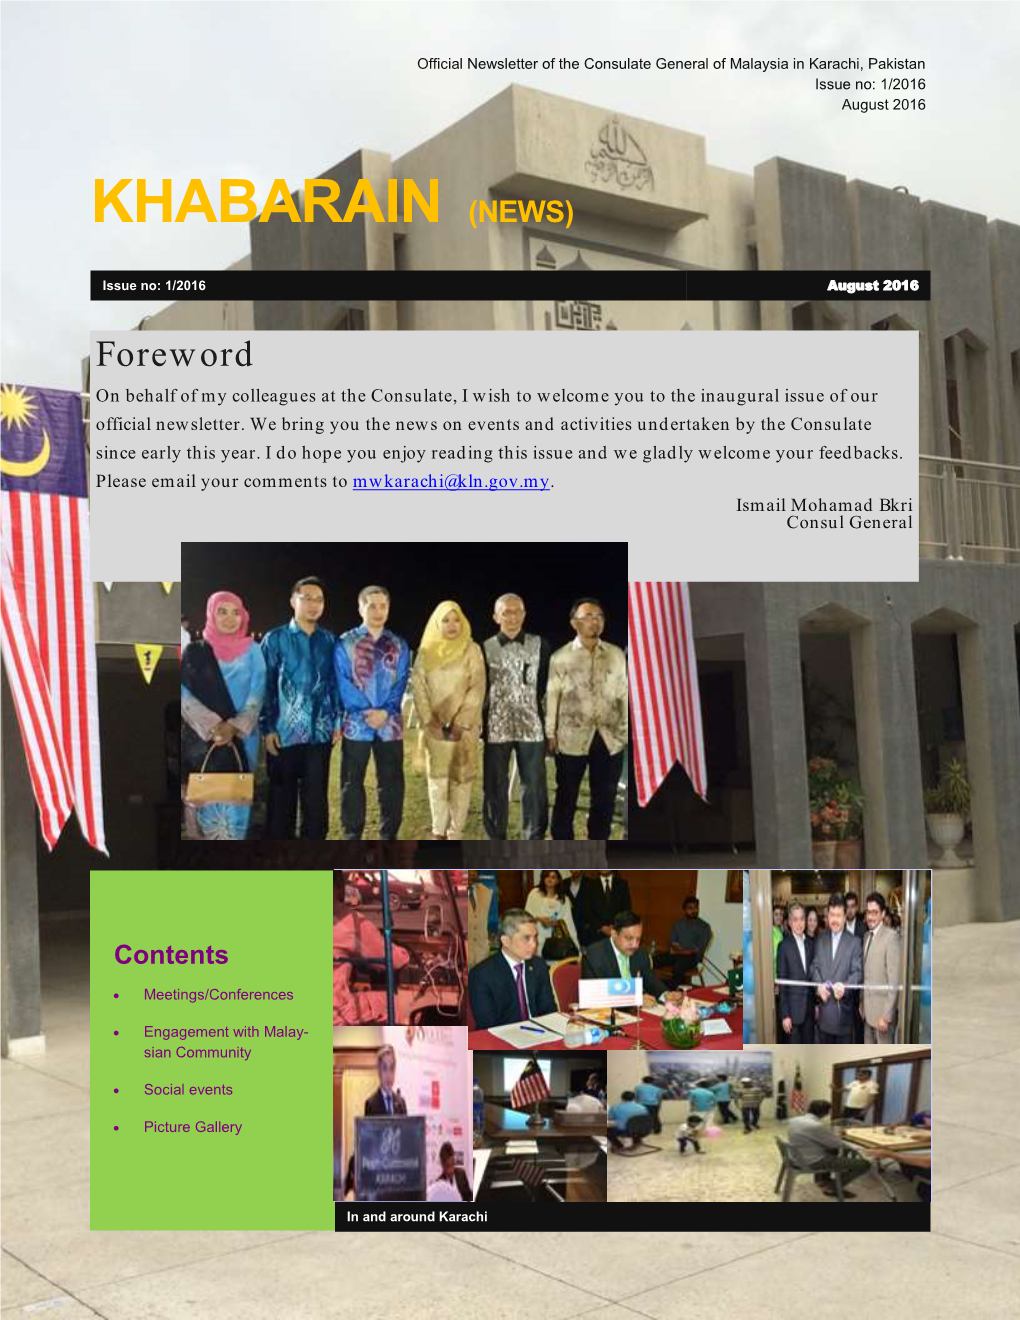 Newsletter of the Consulate General of Malaysia in Karachi, Pakistan Issue No: 1/2016 August 2016